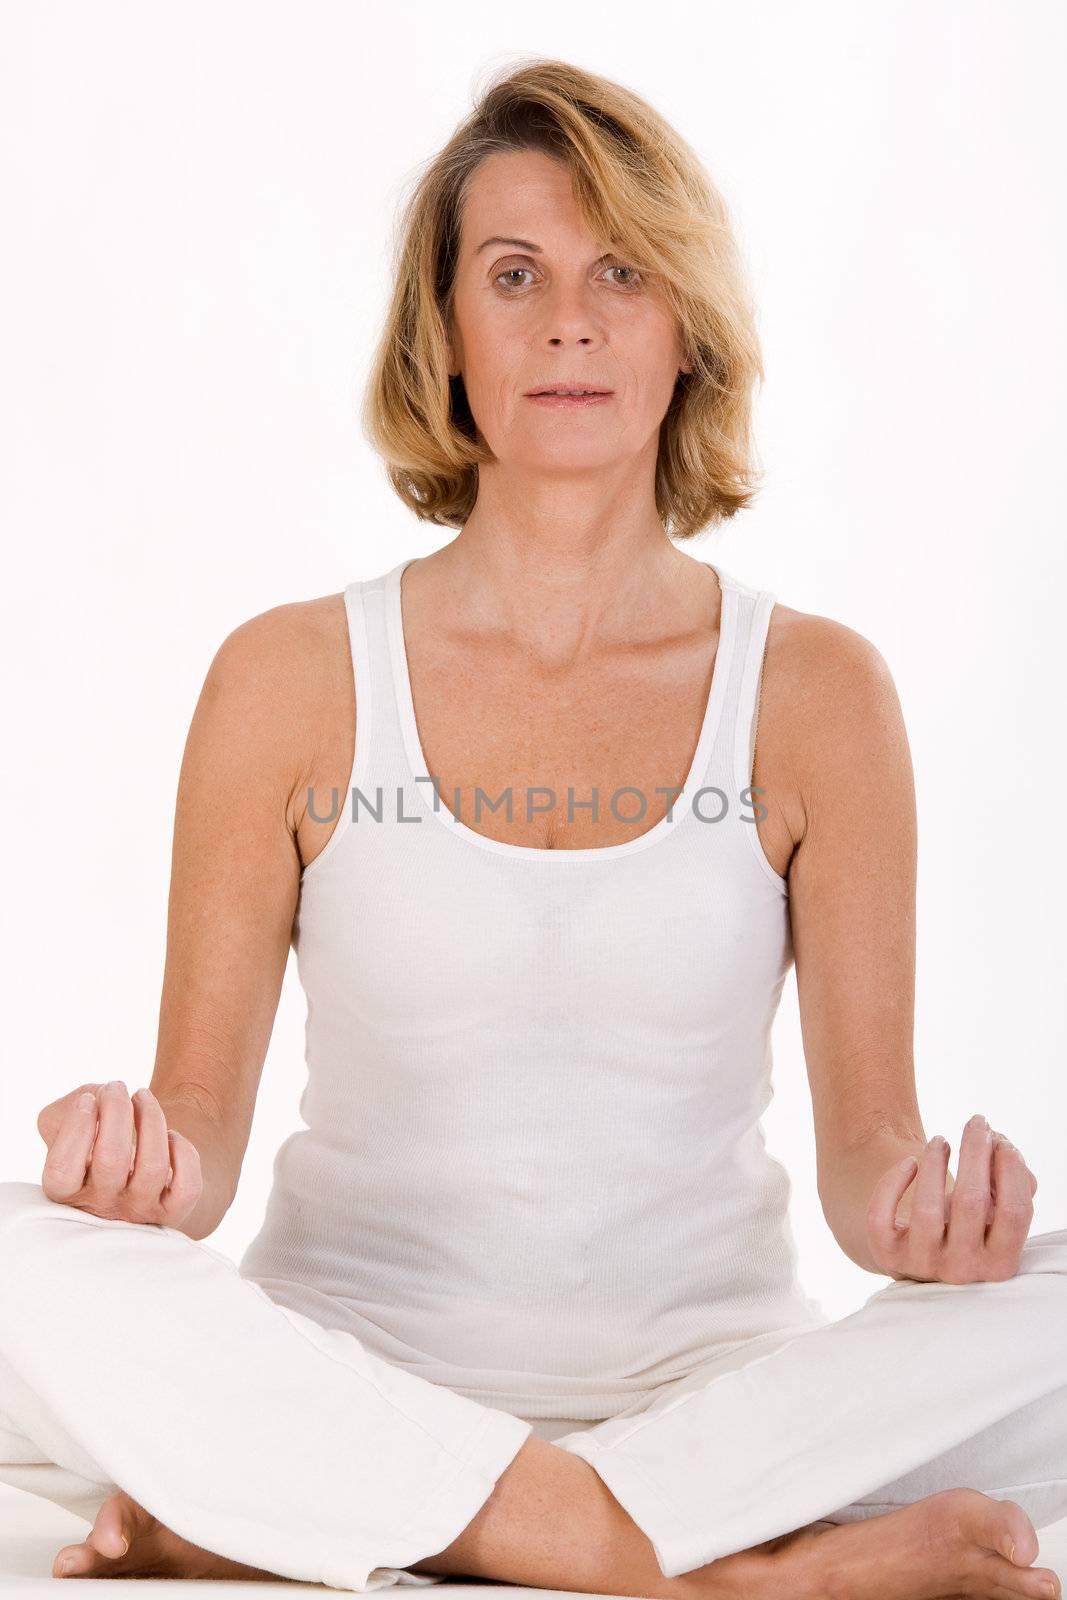 Older lady finds relaxation in yoga